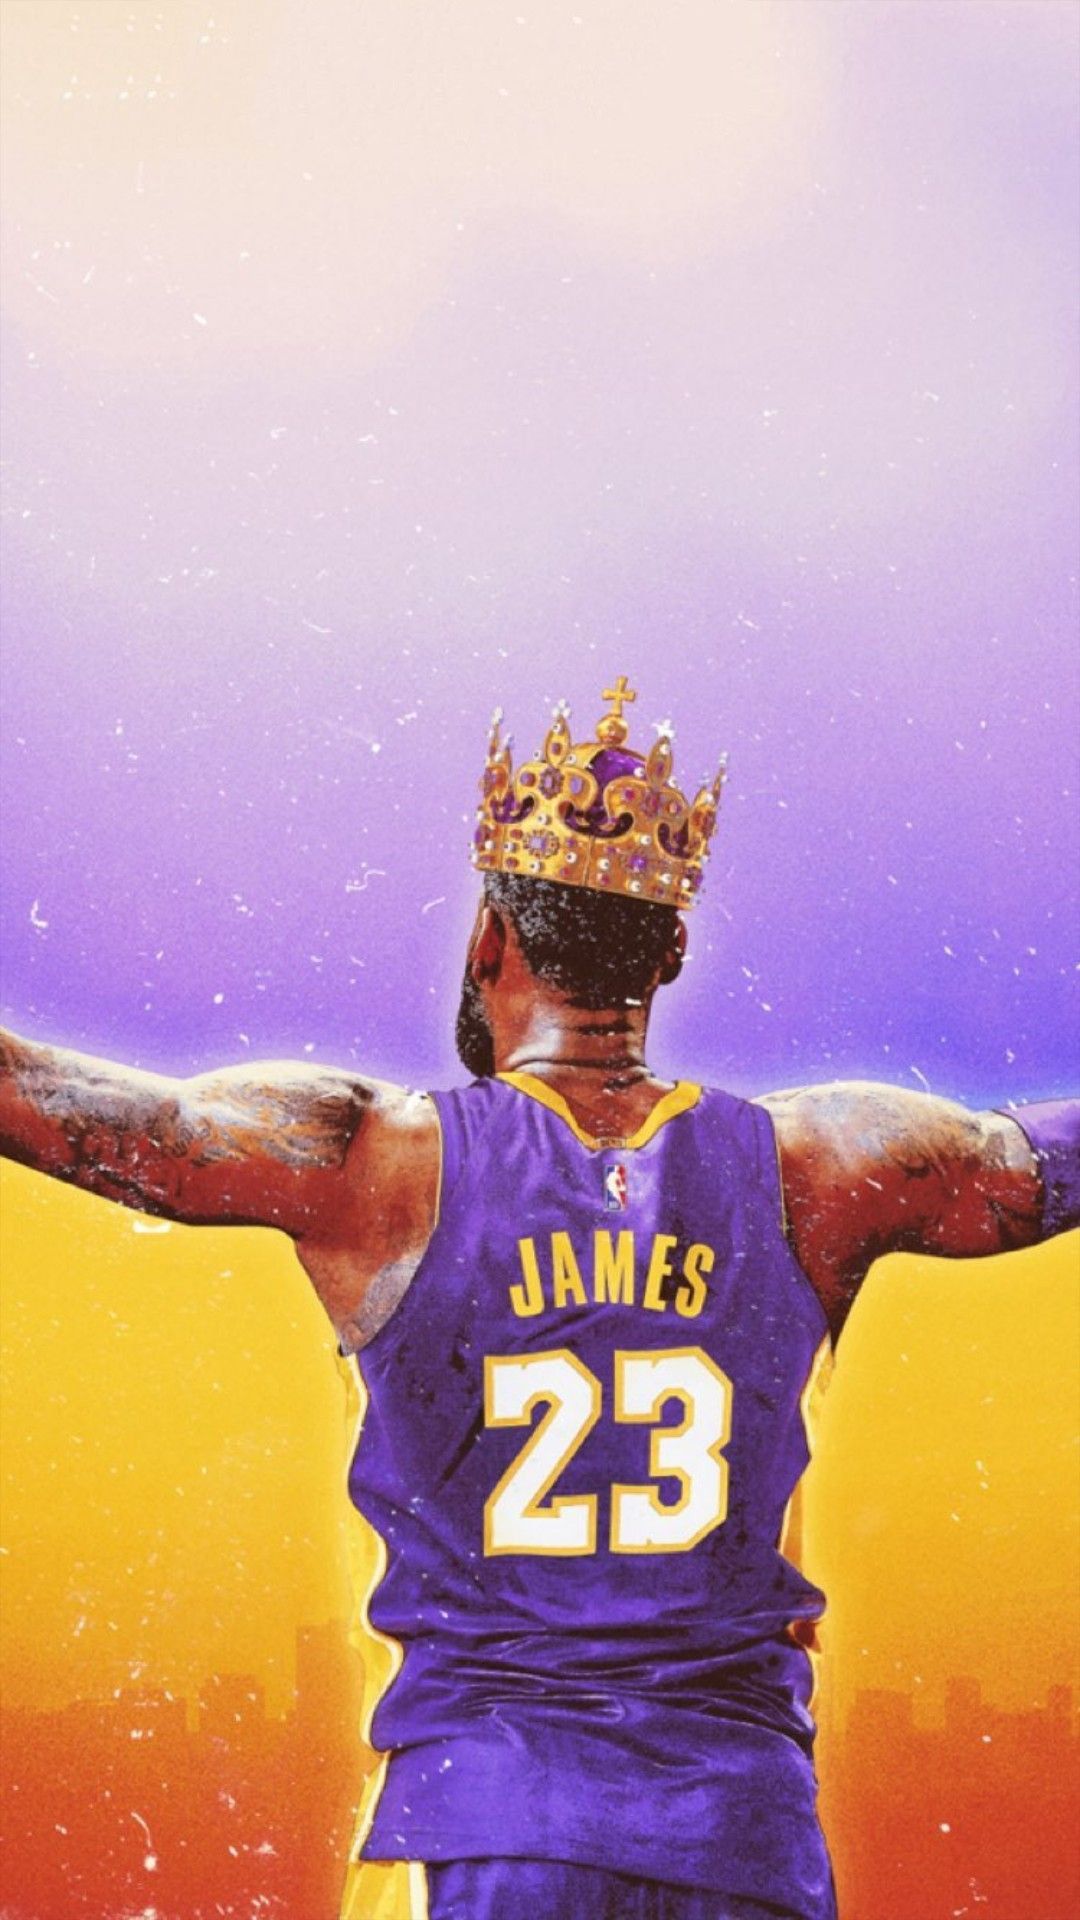 Lebron James Lakers Wallpaper iPhone with image resolution 1080x1920 pixel. You can make this wallpaper for your iPhone 5, 6, 7, 8, X backgrounds, Mobile Screensaver, or iPad Lock Screen - Lebron James